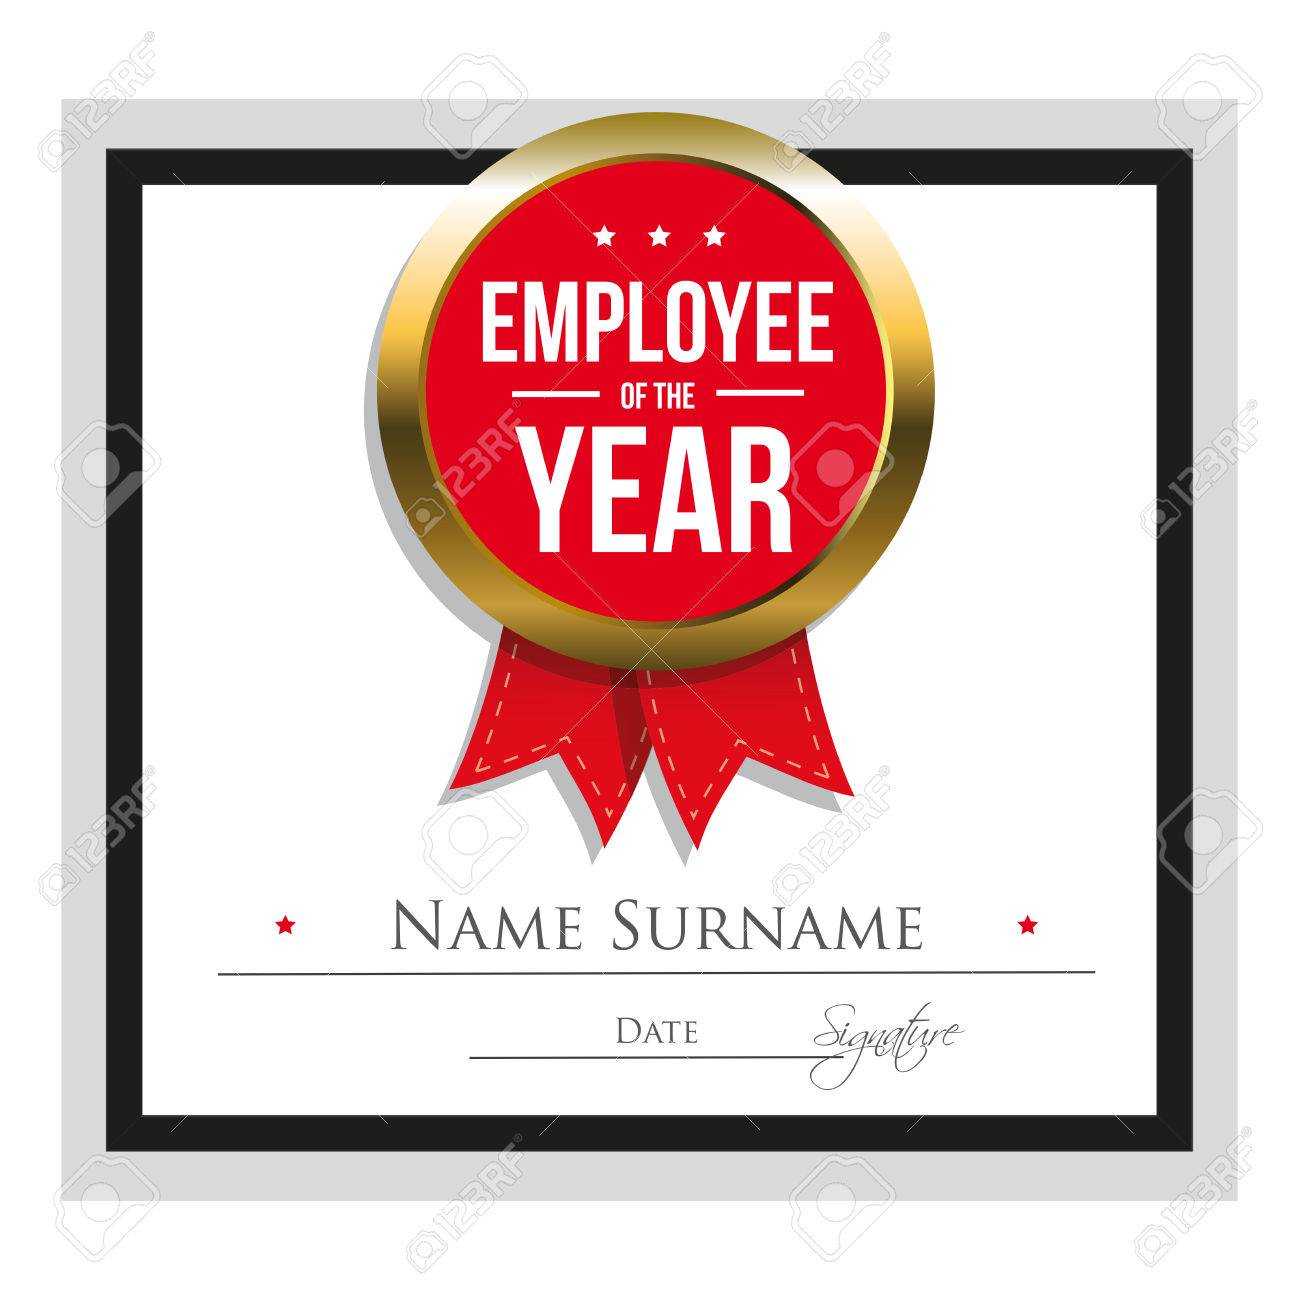 Employee Of The Year Certificate Template Free – Beyti With Funny Certificates For Employees Templates